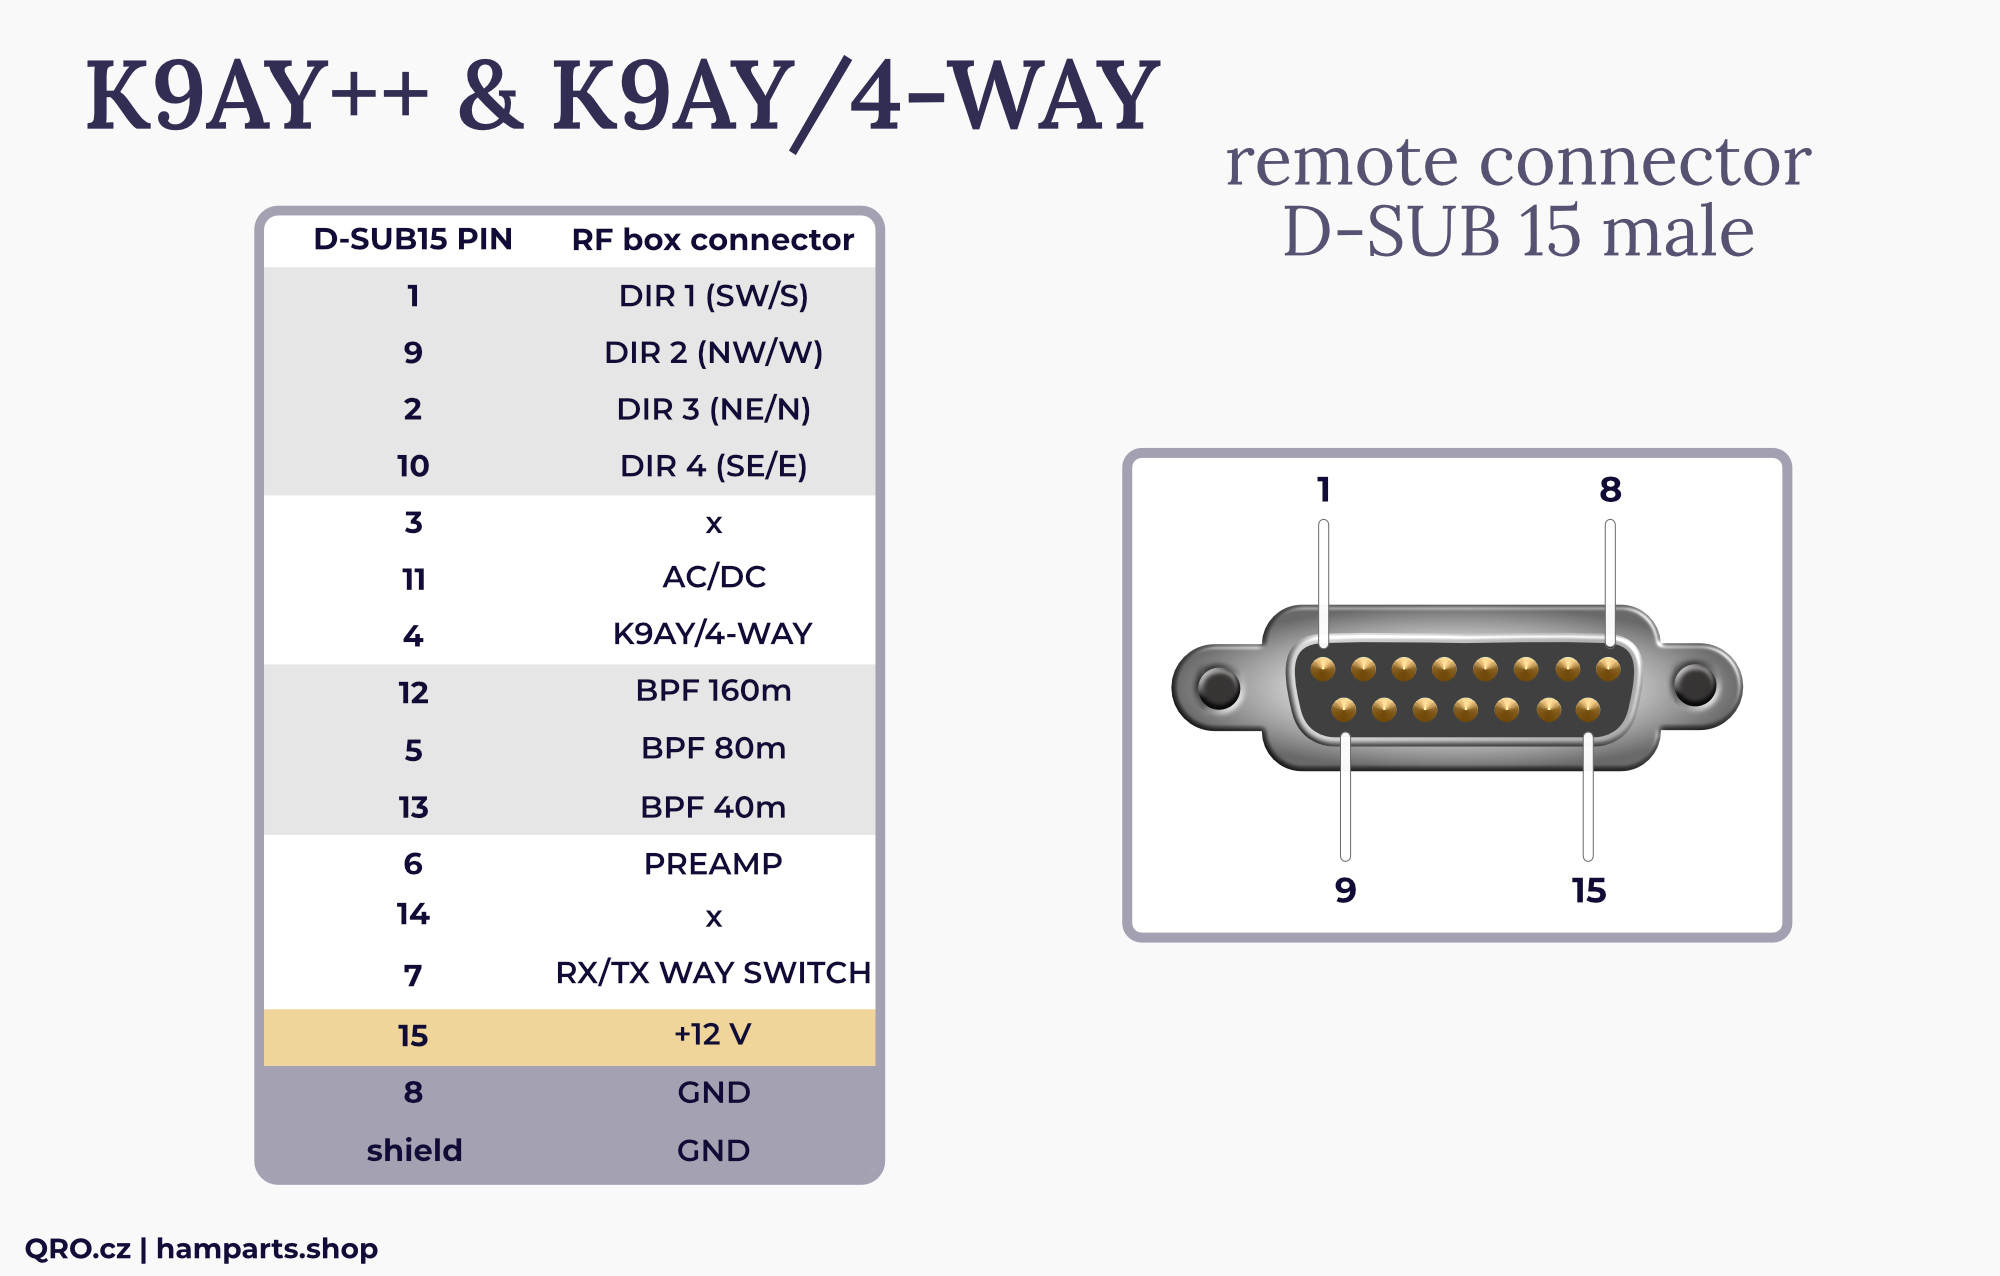 k9ay 4-way antenna switch controller connector d-sub15 male qro.cz hamparts.shop